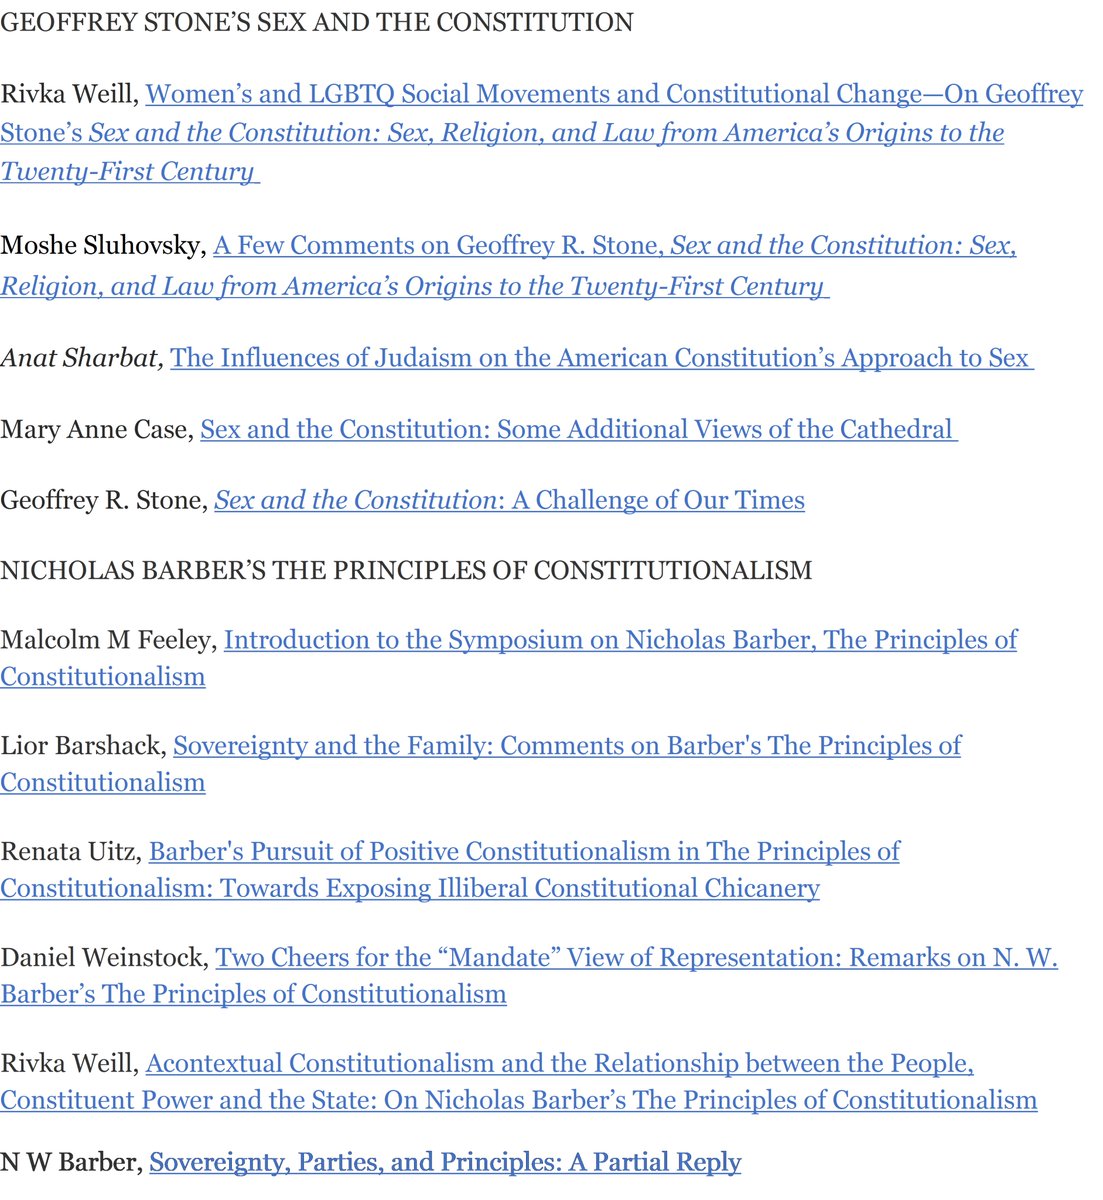 Thrilled to announce the publication of 2 symposia with a terrific line-up of scholars: on #Sex and the #Constitution by @stone_geoffrey @UChicagoLaw & Principles of #Constitutionalism by Nick Barber @OxfordFLJS @OxfordLawFac @mcgillu @ceu @UCBerkeley #abortion #CivilRights